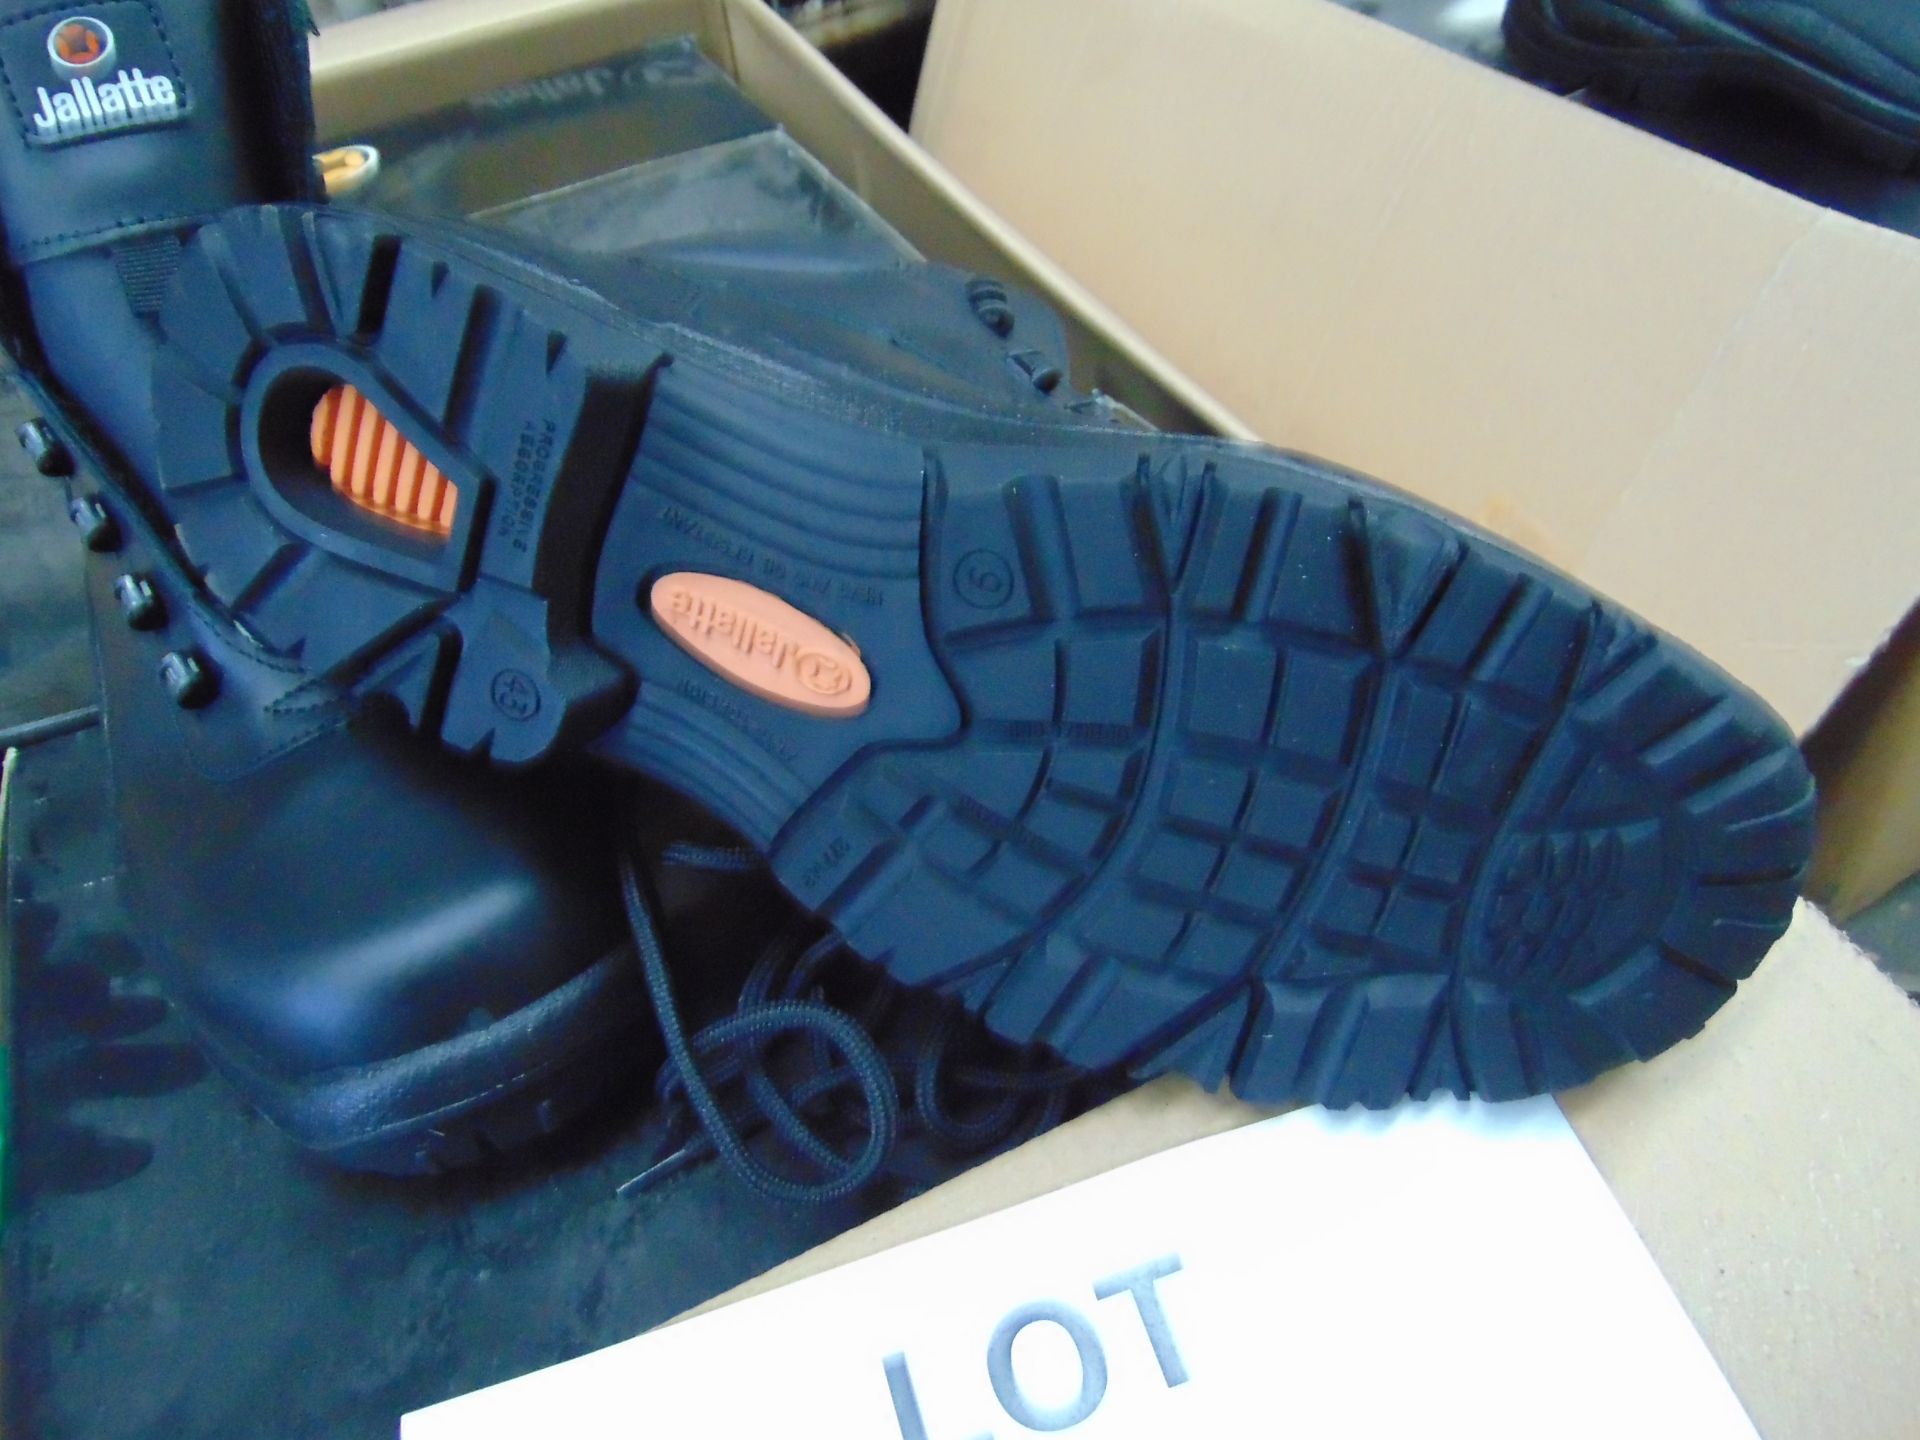 Qty 5 x UNISSUED Jallatte Safety Boots Size 9 - Image 3 of 4